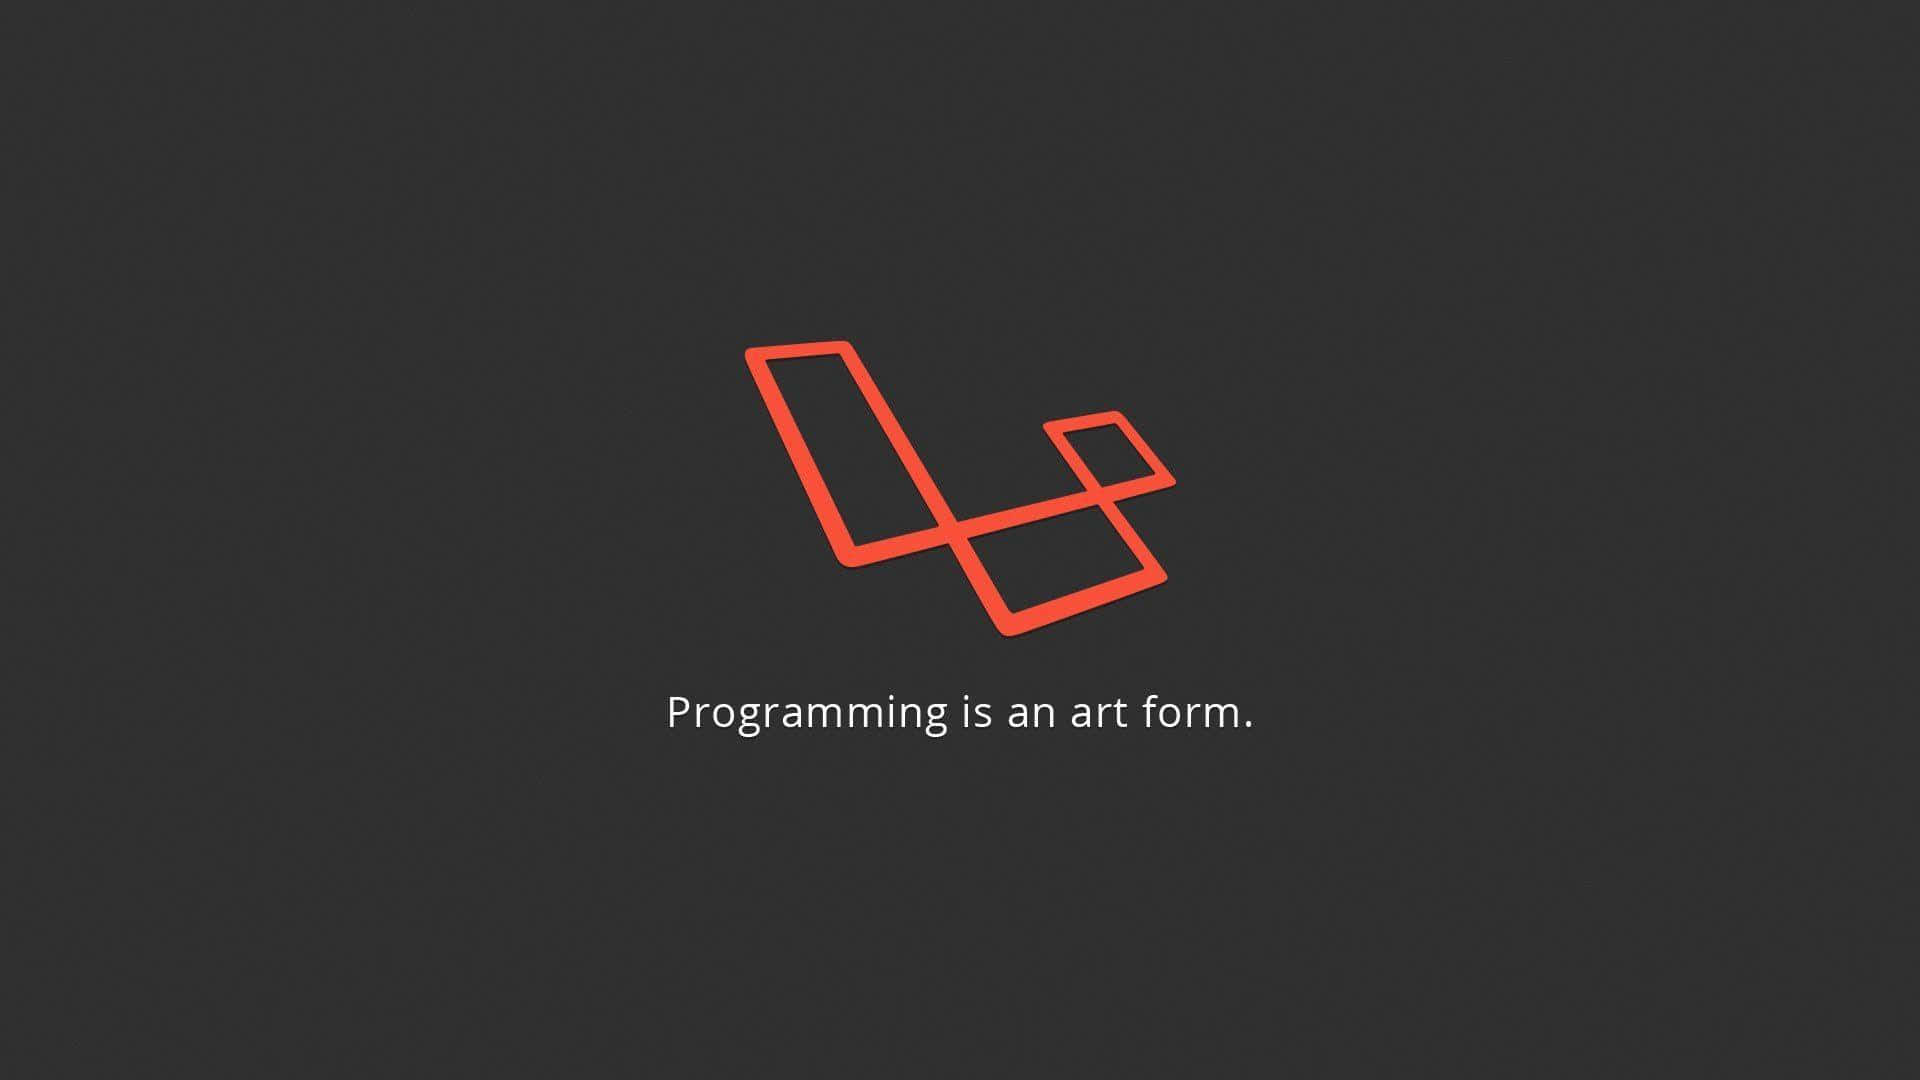 Unleashing Your Programming Potential Wallpaper